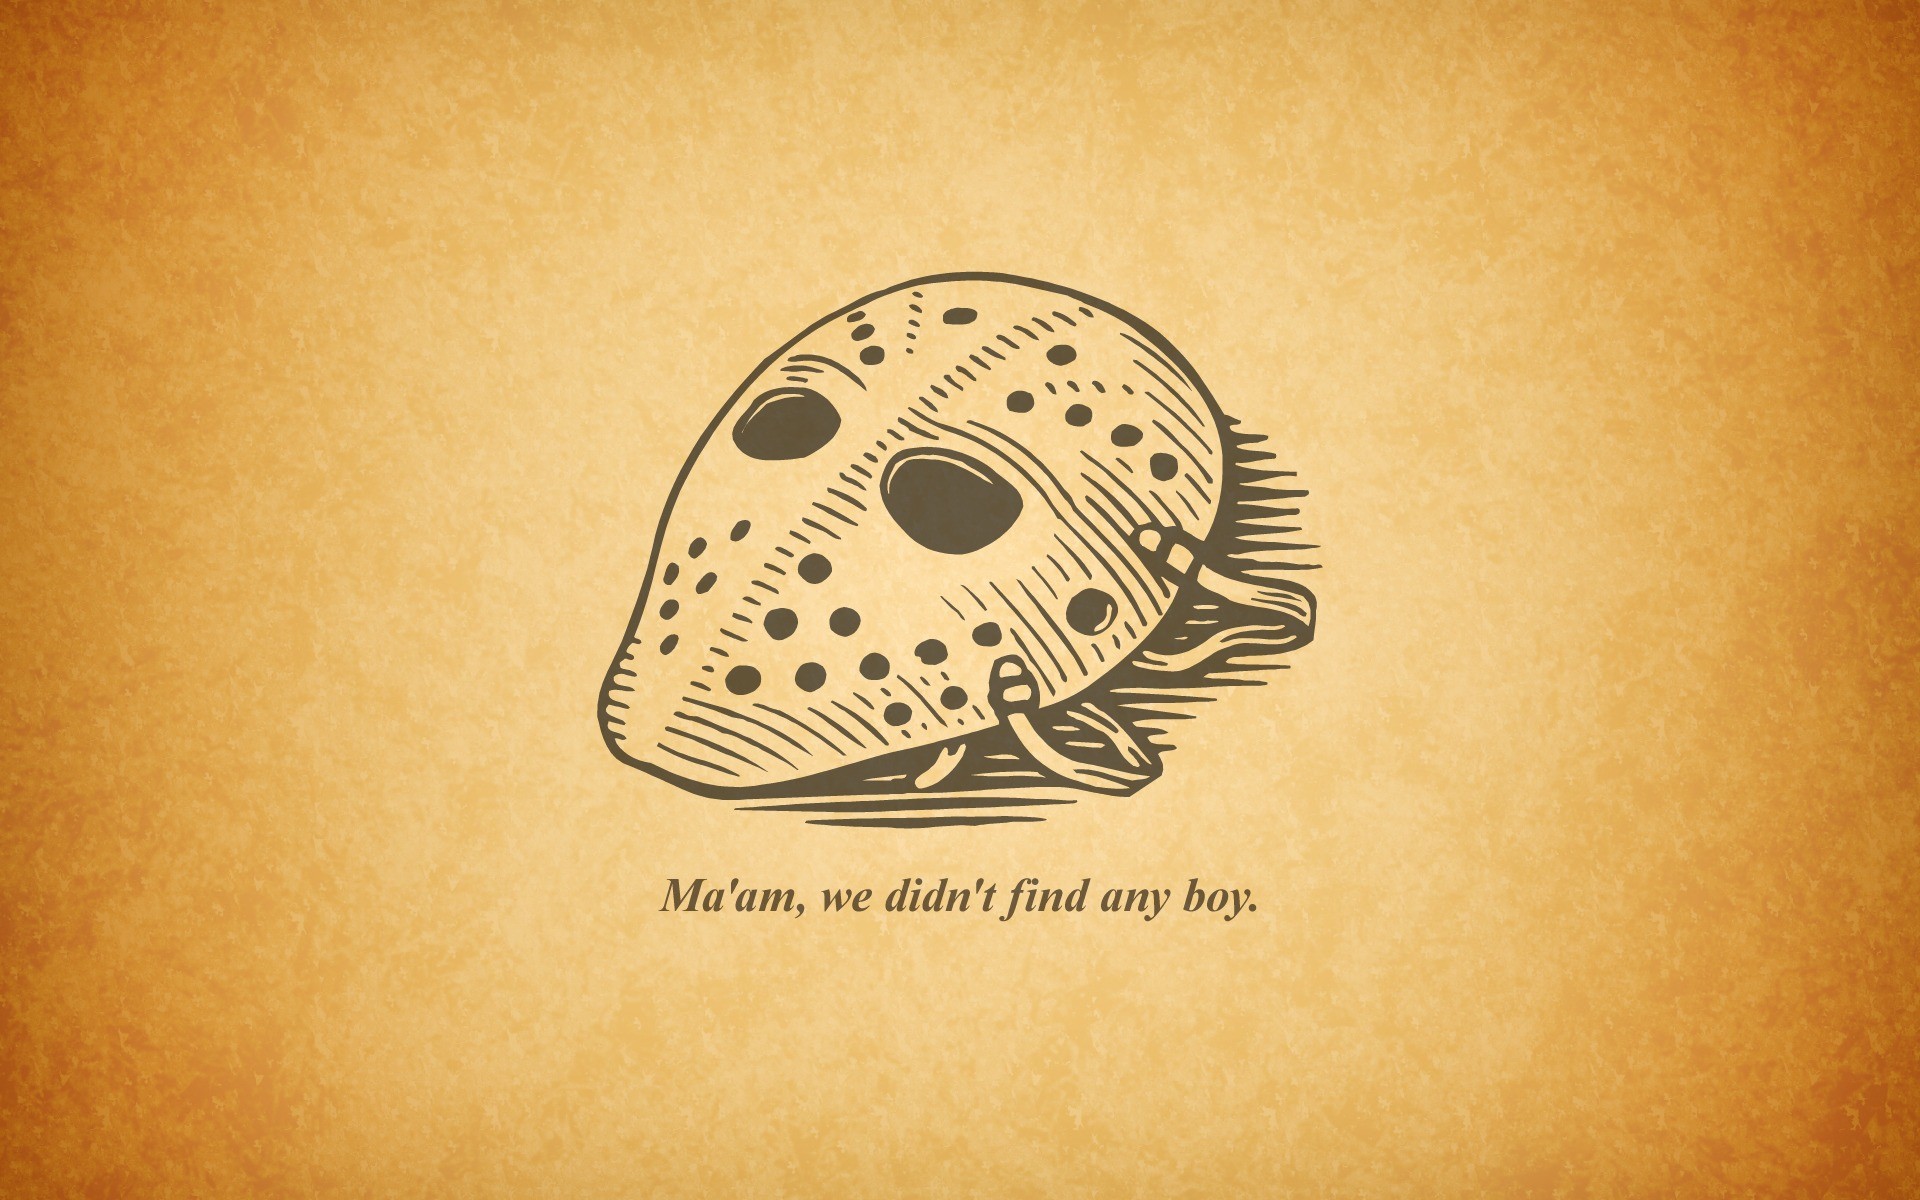 Friday the 13th quote HD Wallpaper 1920×1200